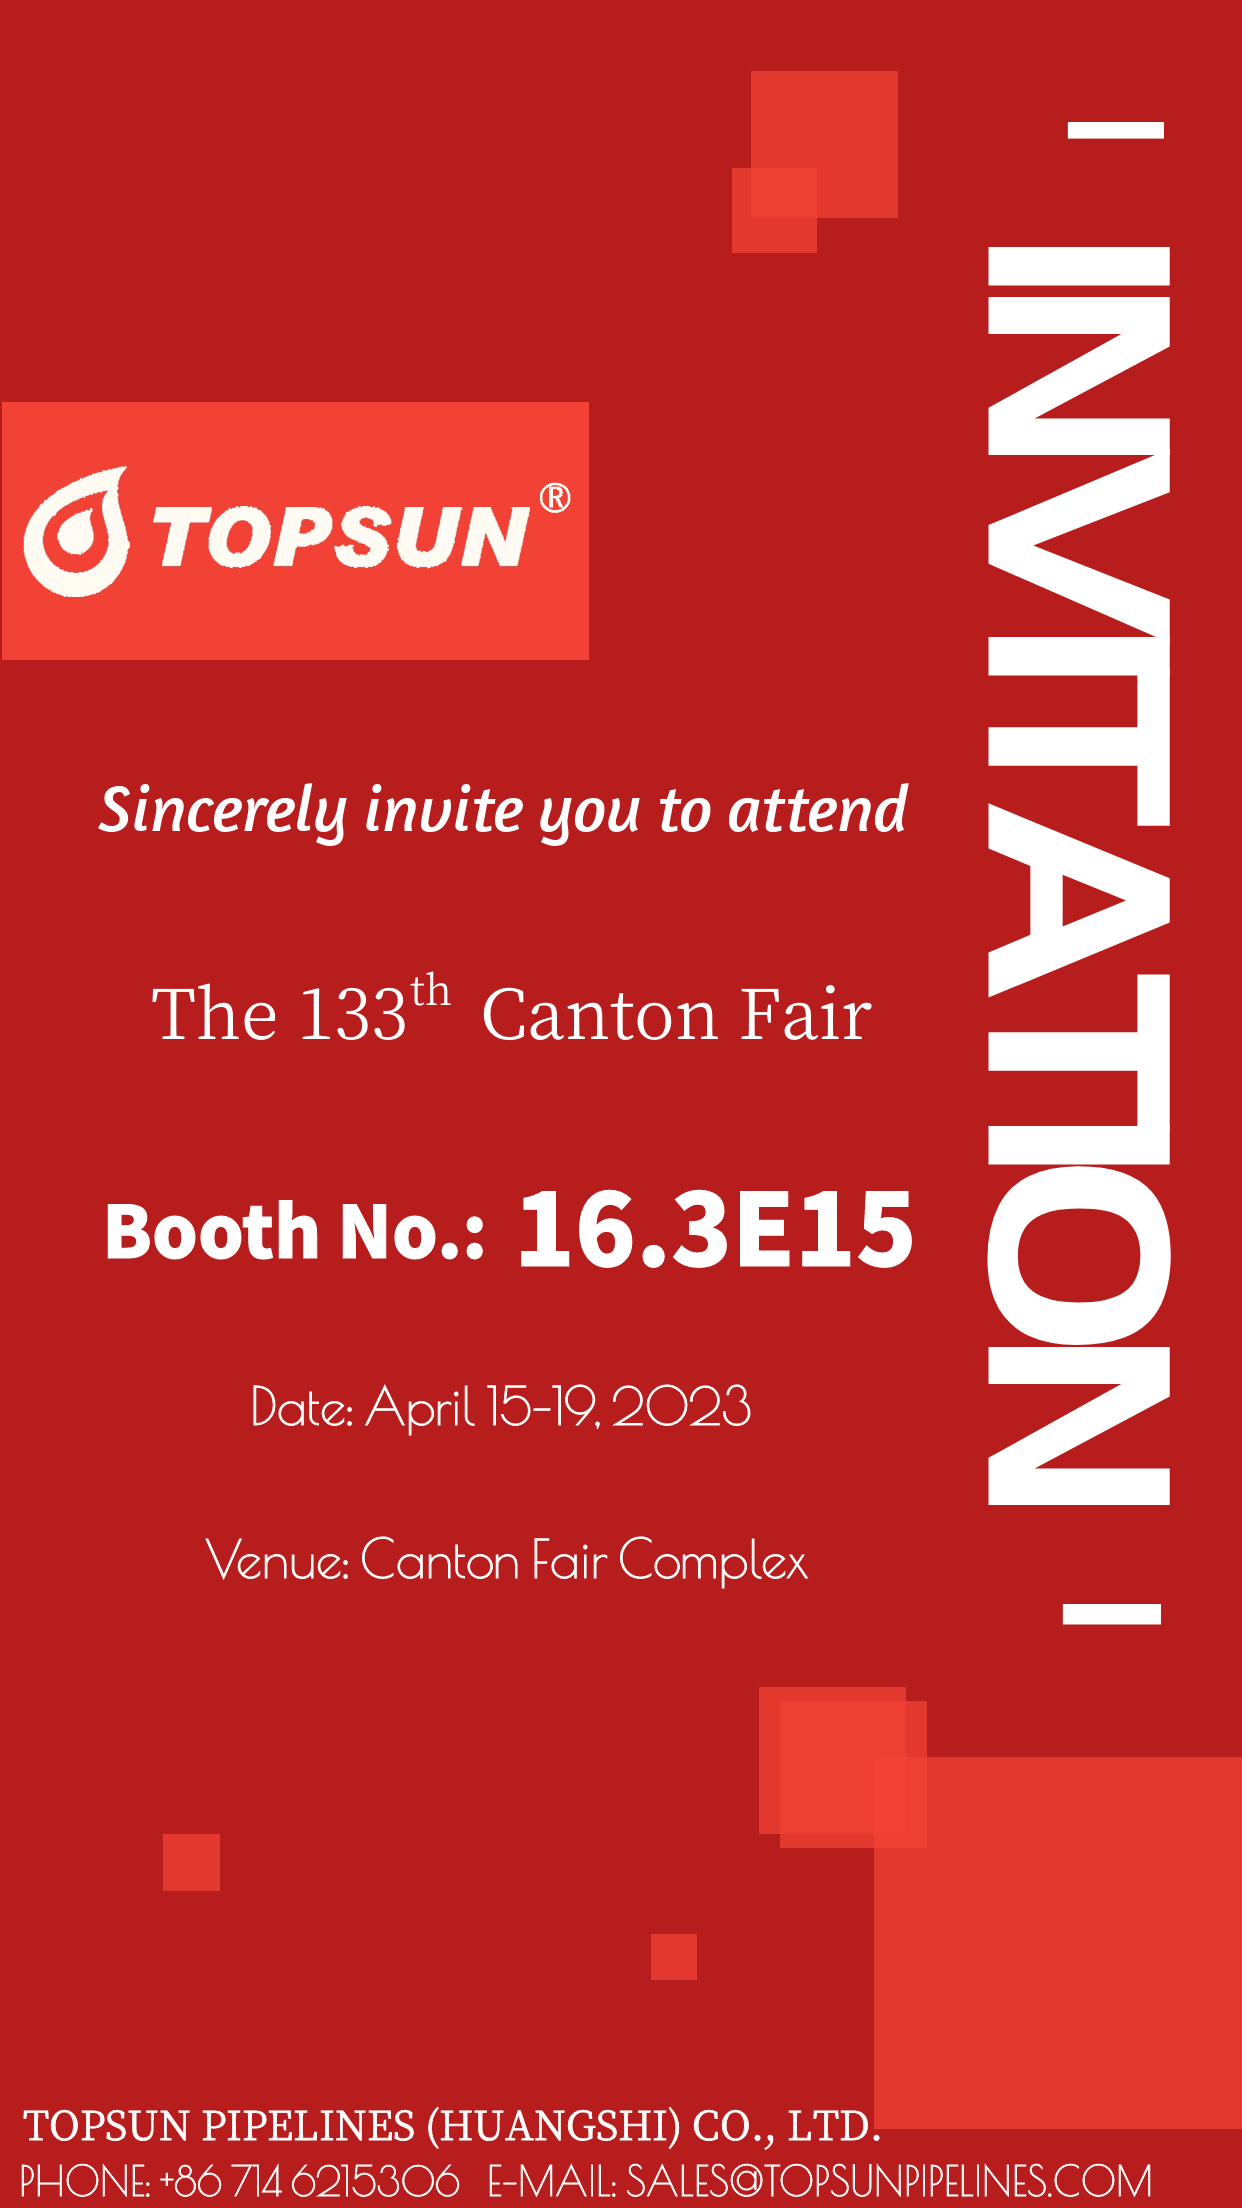 We are on the way. Let's meet at the Canton Fair to create more business!